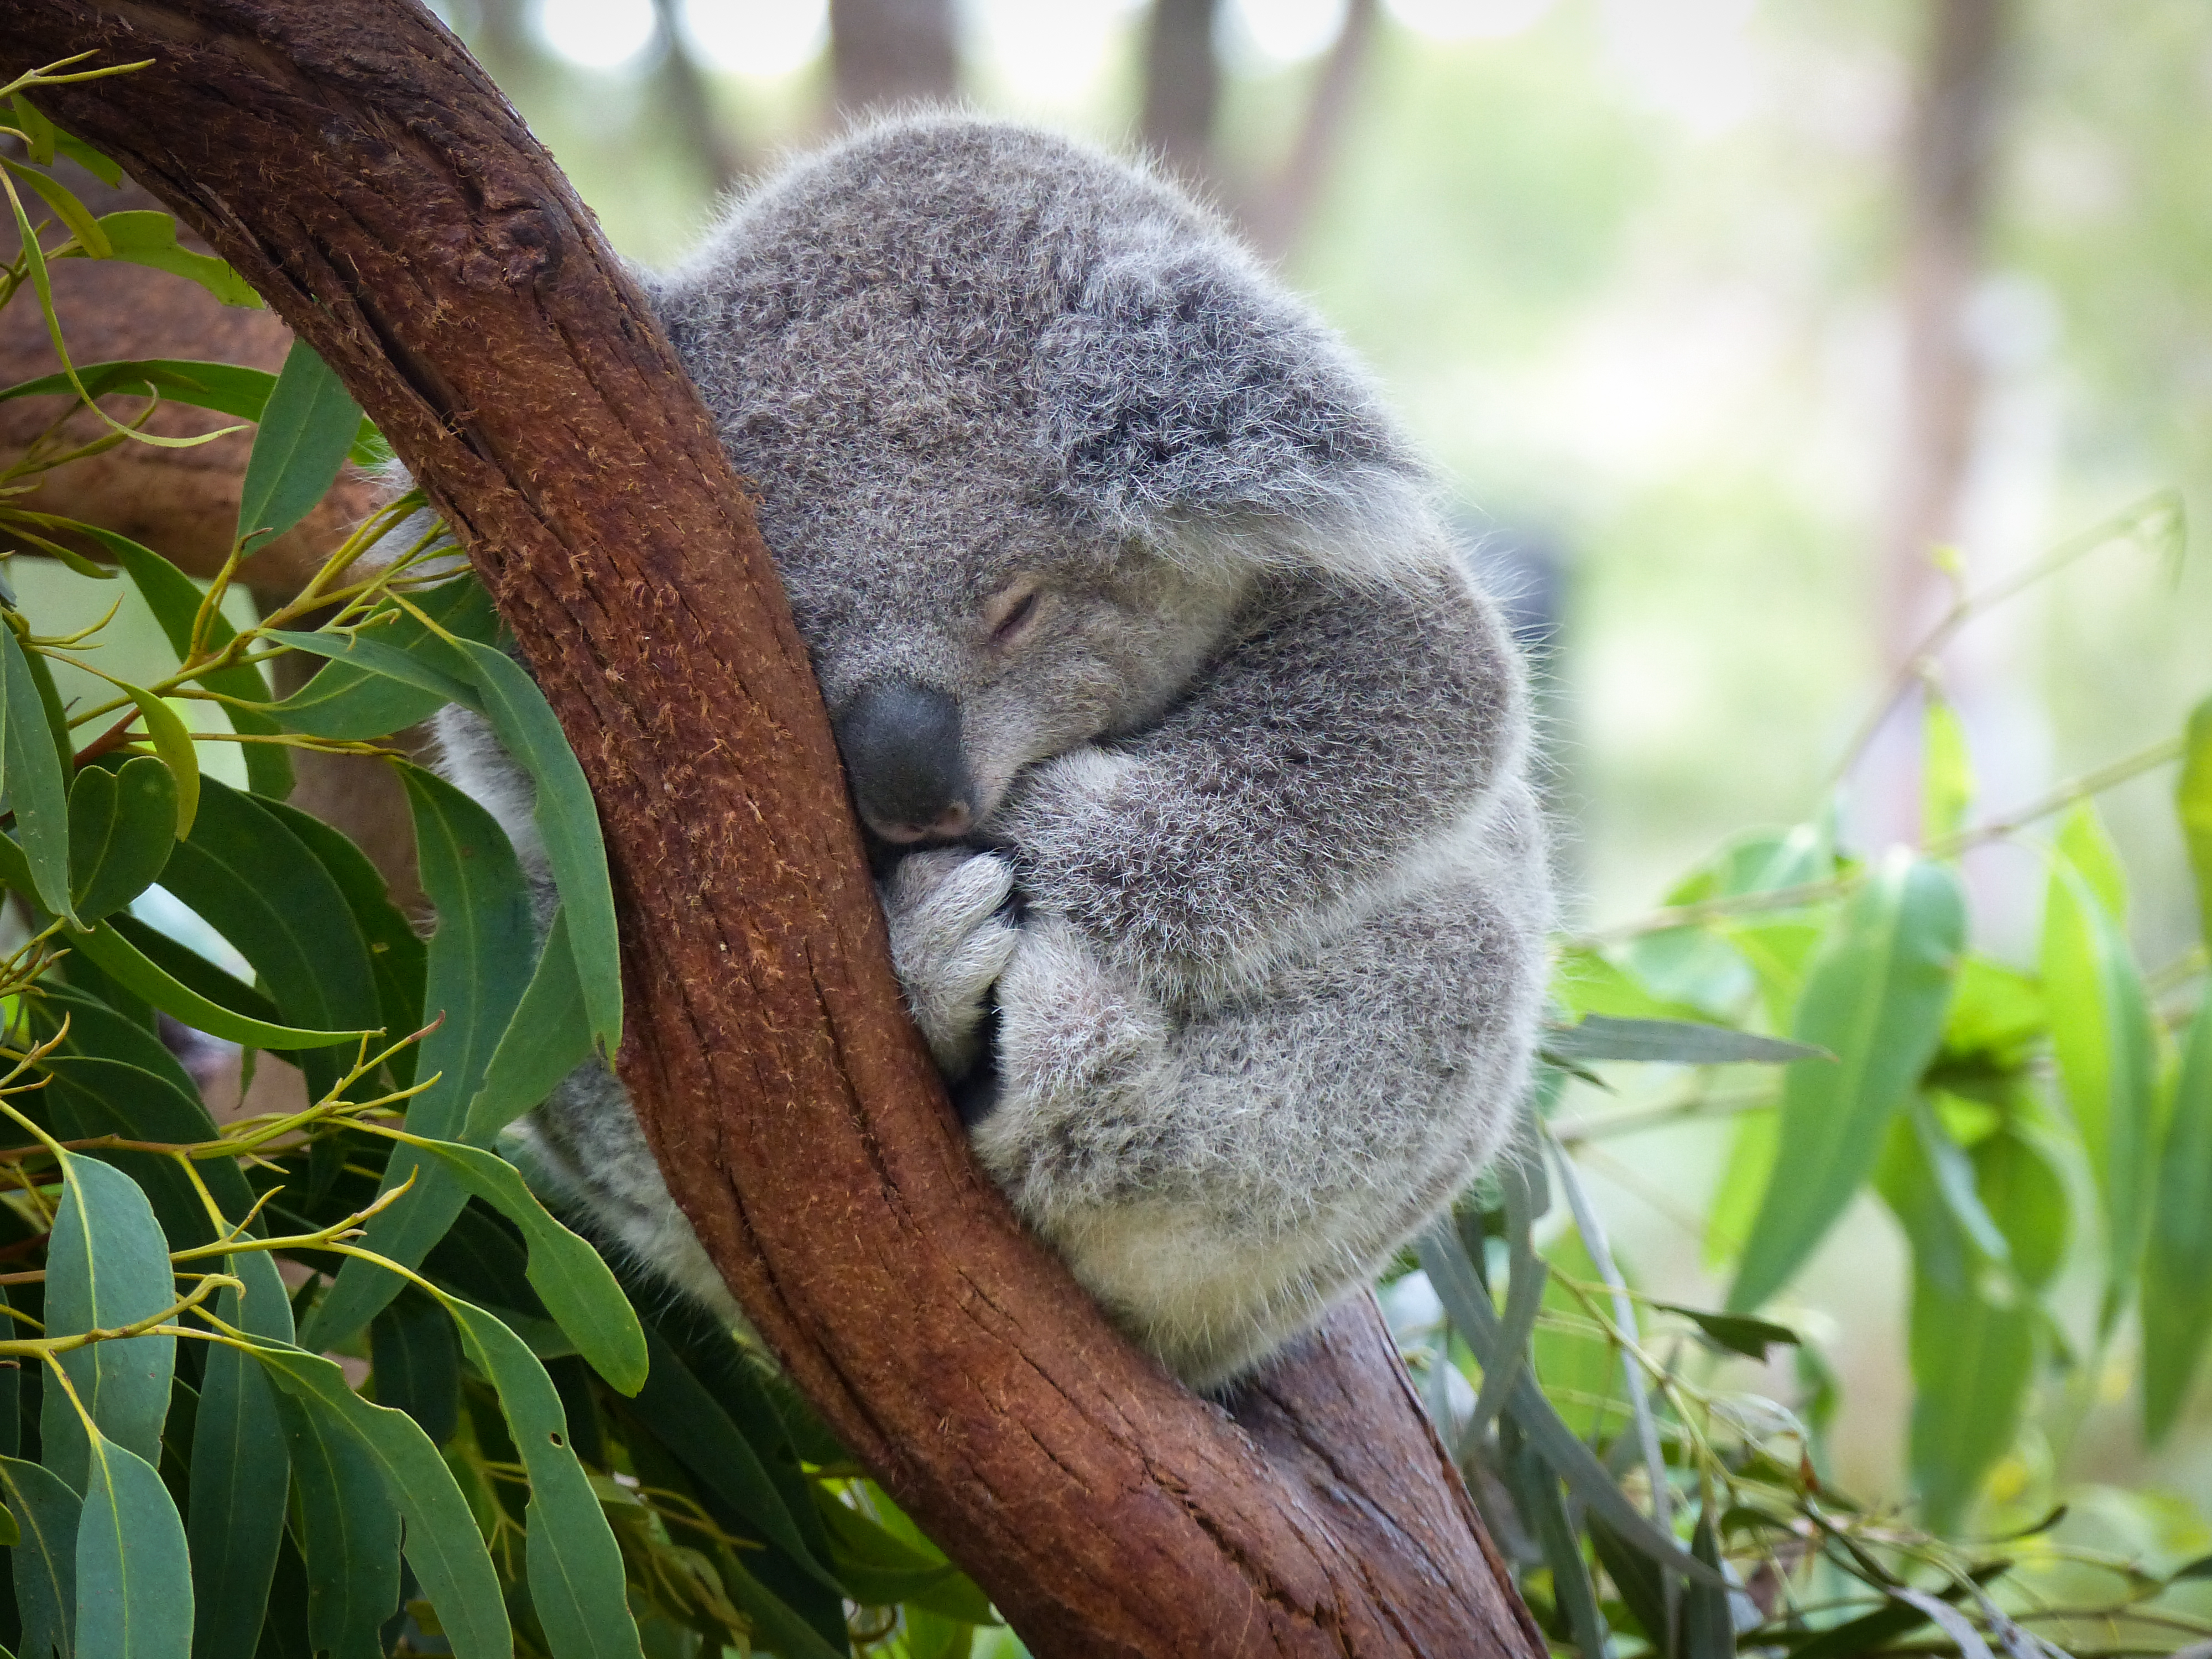 Koalas bump noses and other fun facts | Think